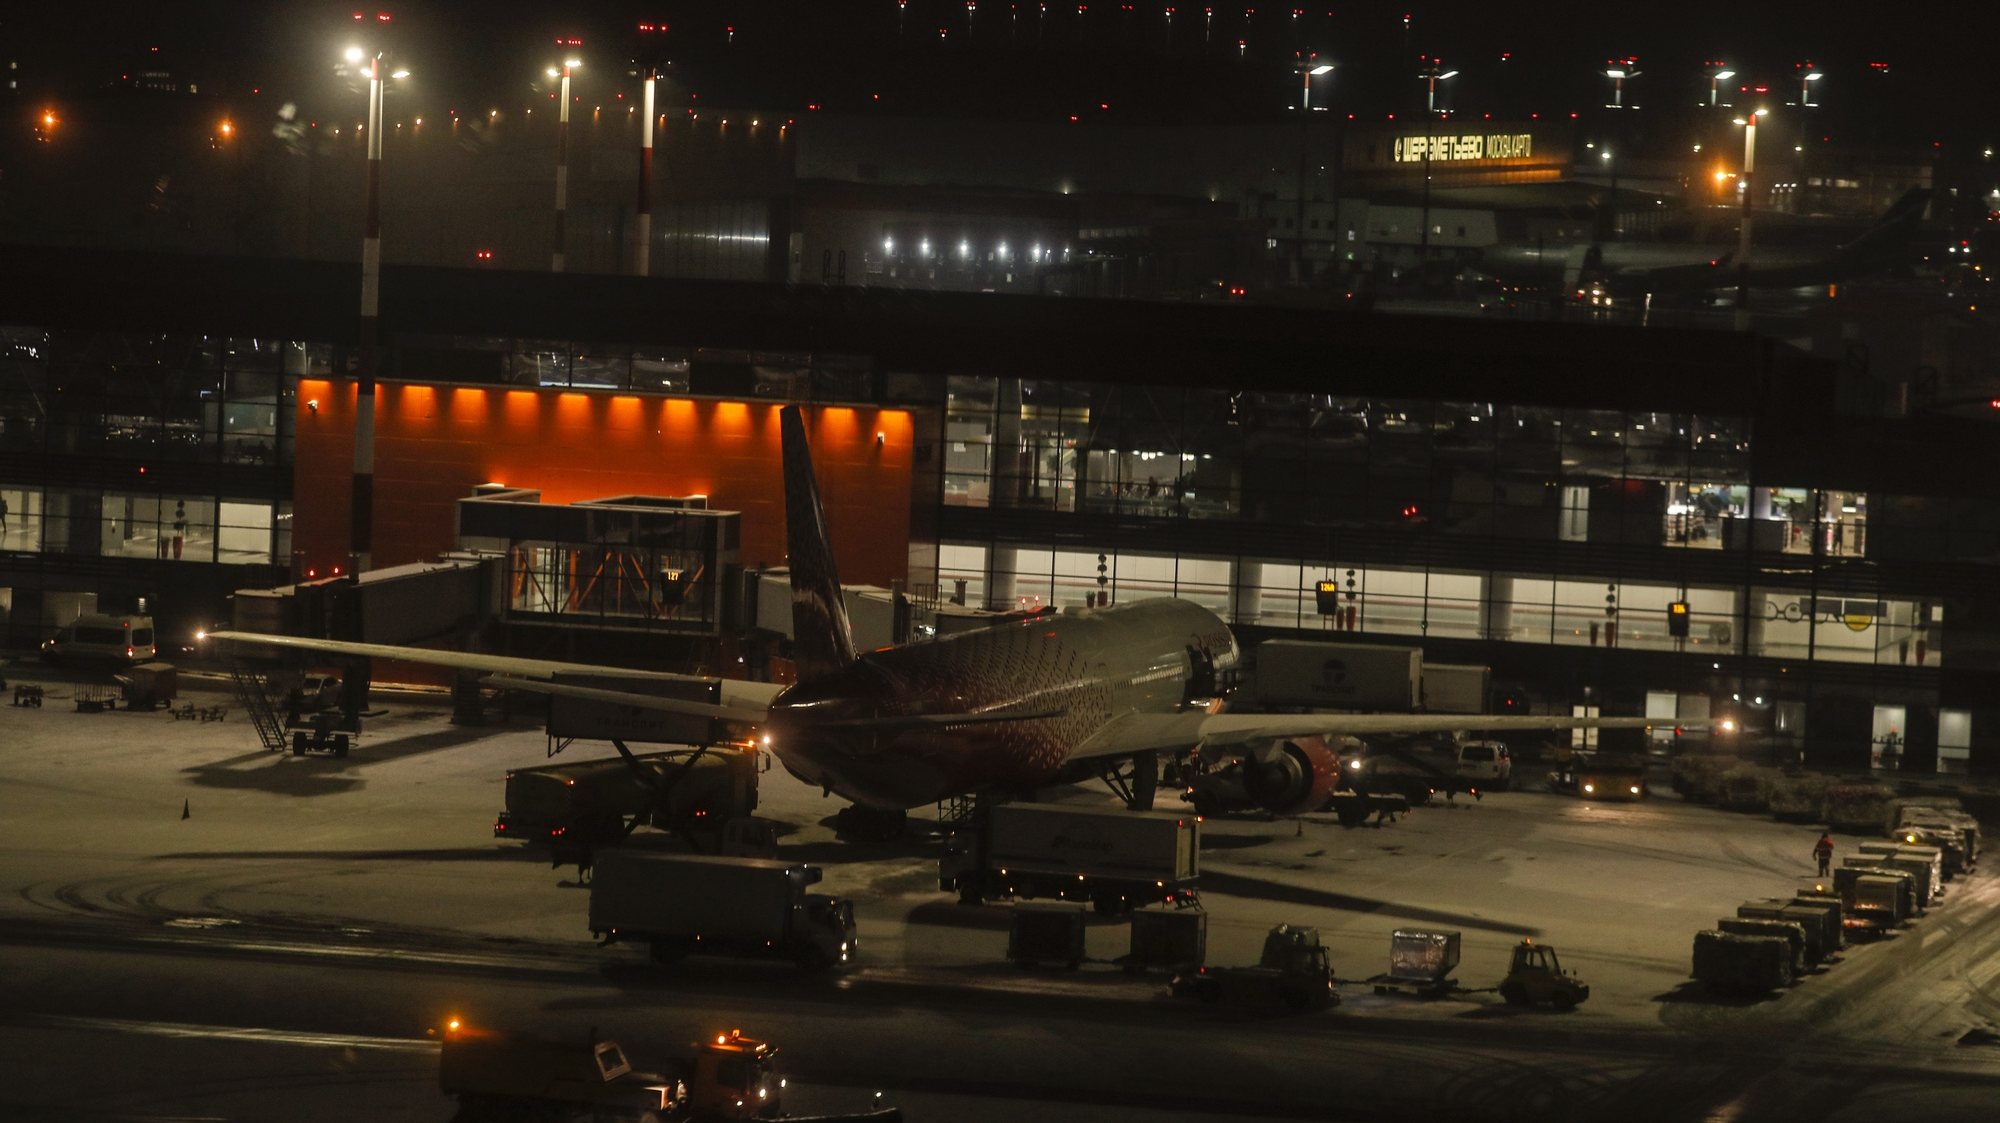 epa08902847 A Rossiya aircraft (Boeing 777-312, Tail number EI-UNM) stands near the Terminal C of the Sheremetyevo International Airport in Moscow, Russia, 24 December 2020. Sheremetyevo Alexander S. Pushkin International Airport is one of four international airports in Moscow.  EPA/SERGEI ILNITSKY